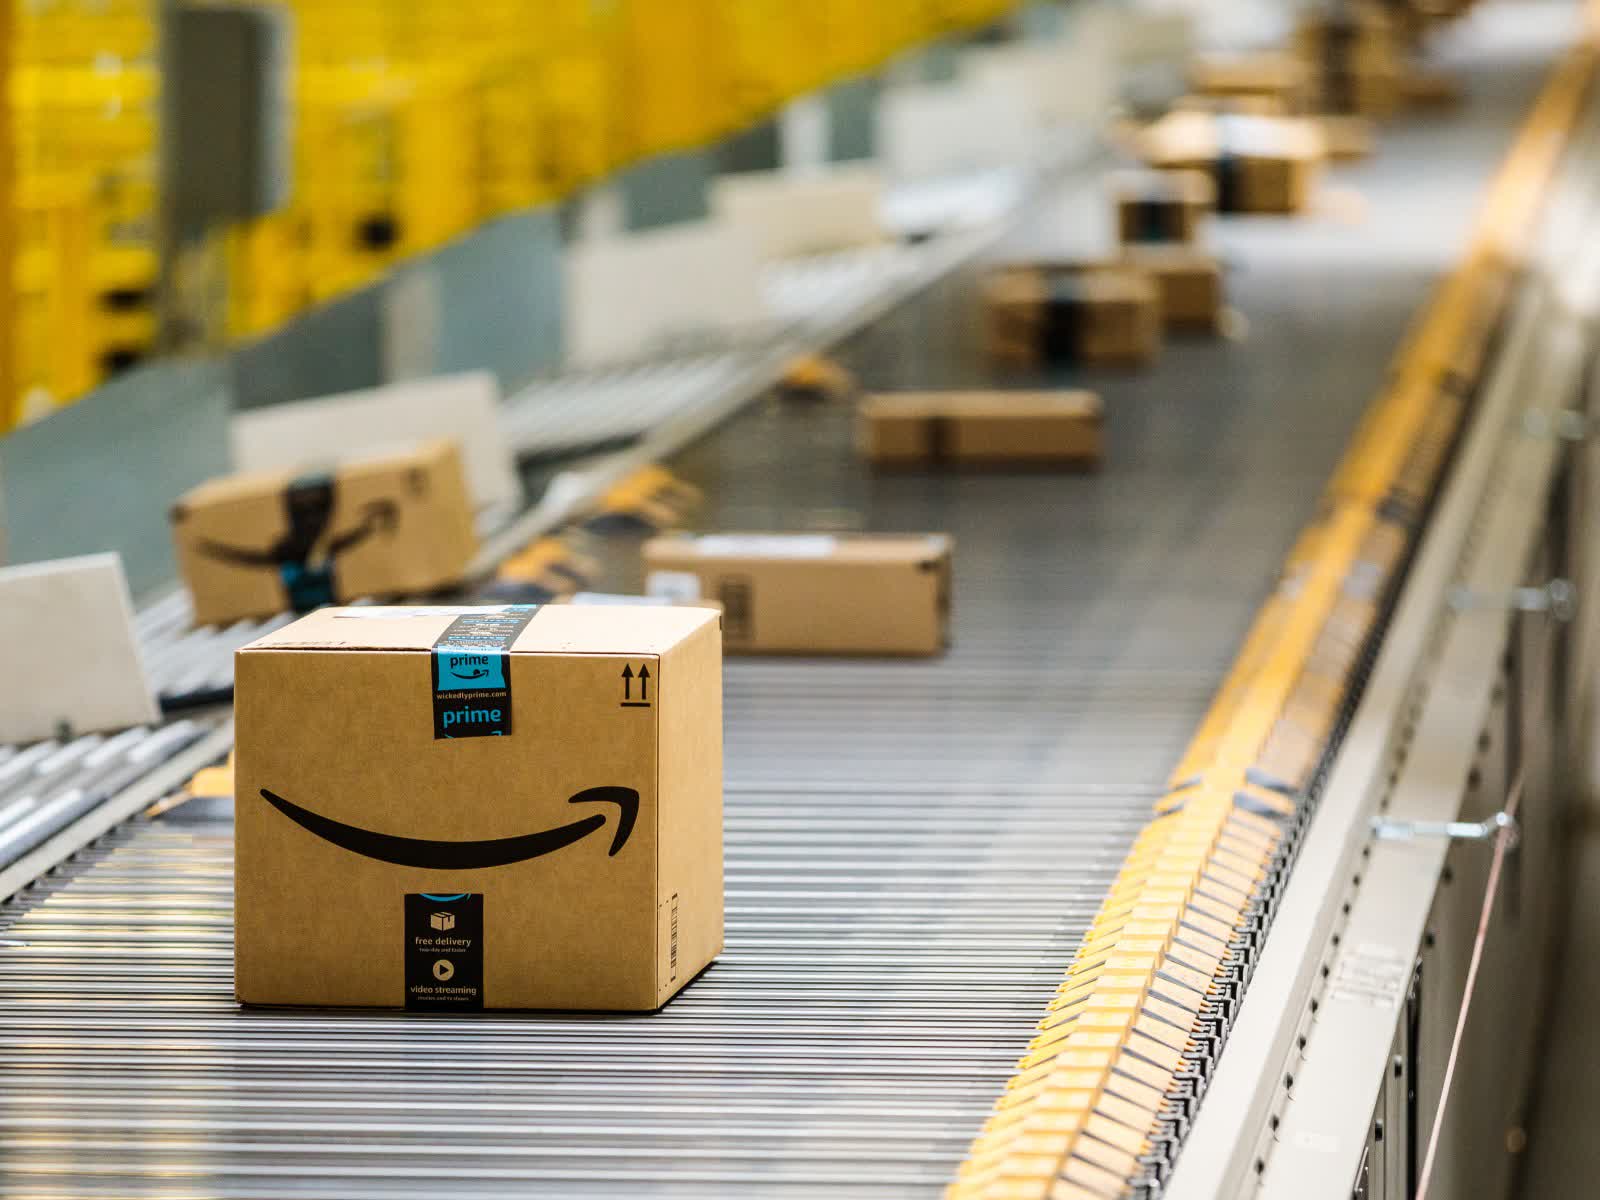 Prime Day 2022 was Amazon's biggest shopping event ever with over 300 million items sold